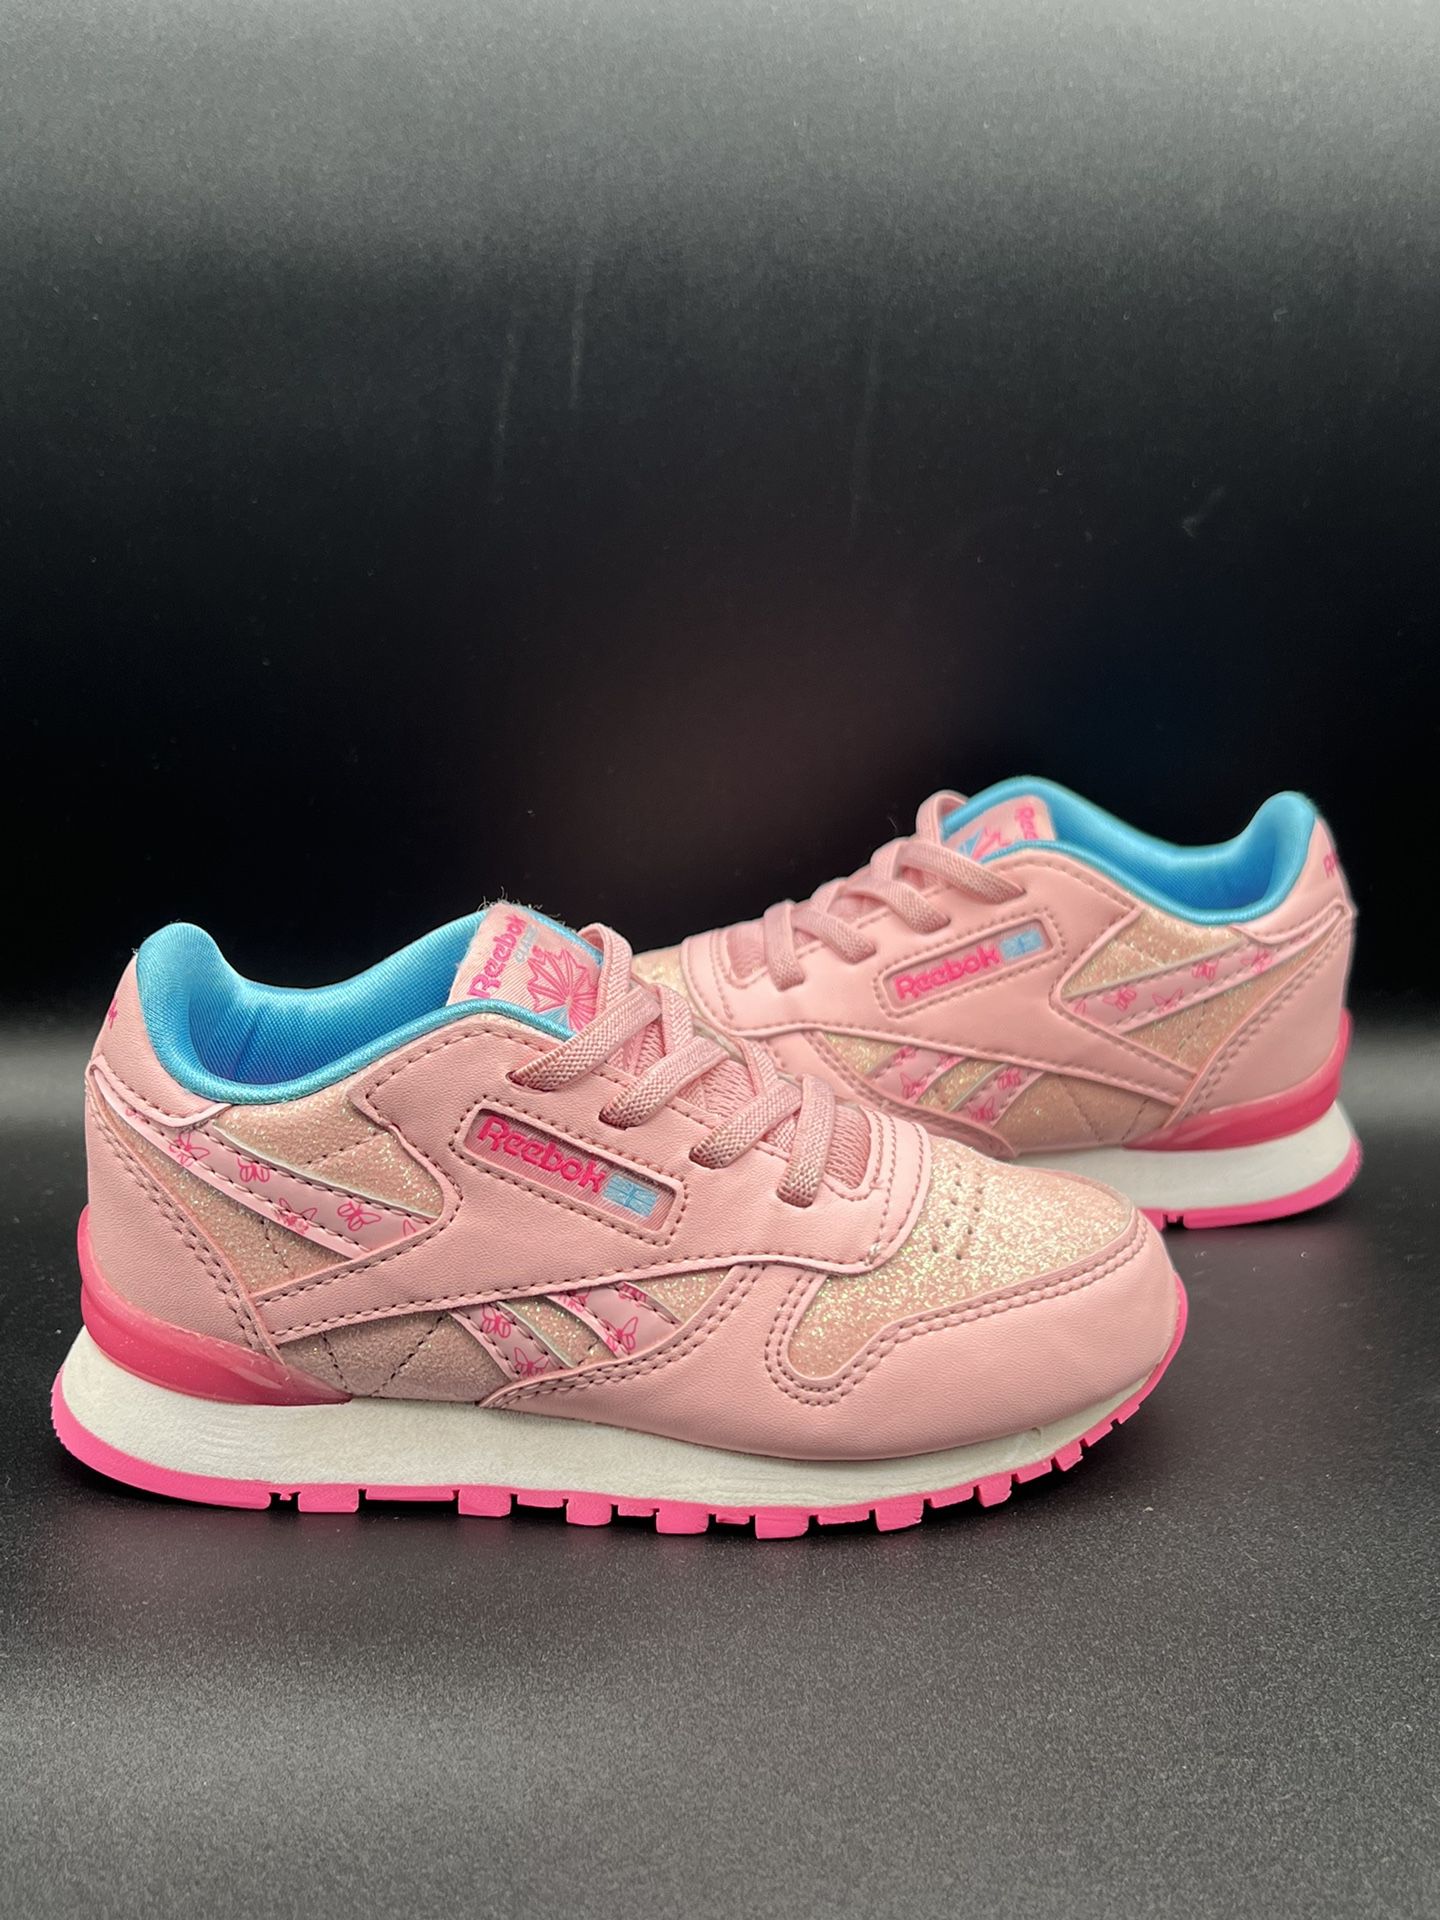 Reebok Classic Leather Step N Flash Butterfly Glitter - Kids Toddler Size 10 (HR0656)